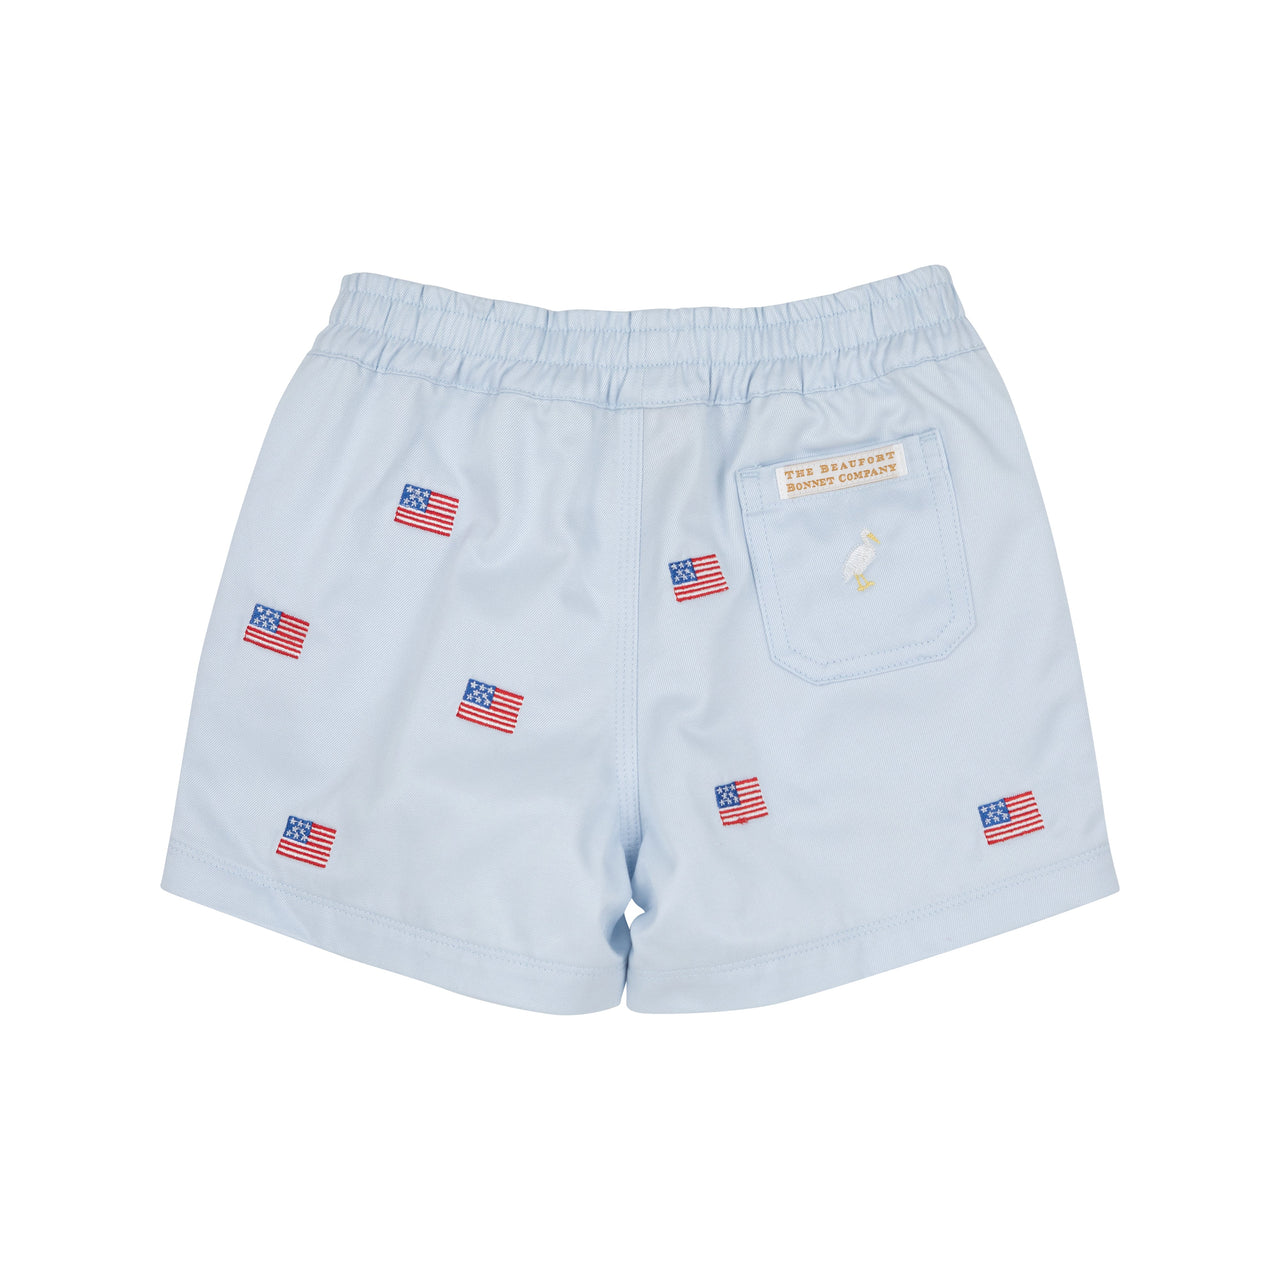 Critter Sheffield Shorts | Buckhead Blue & American Flag Embroidery with Multicolor Stork